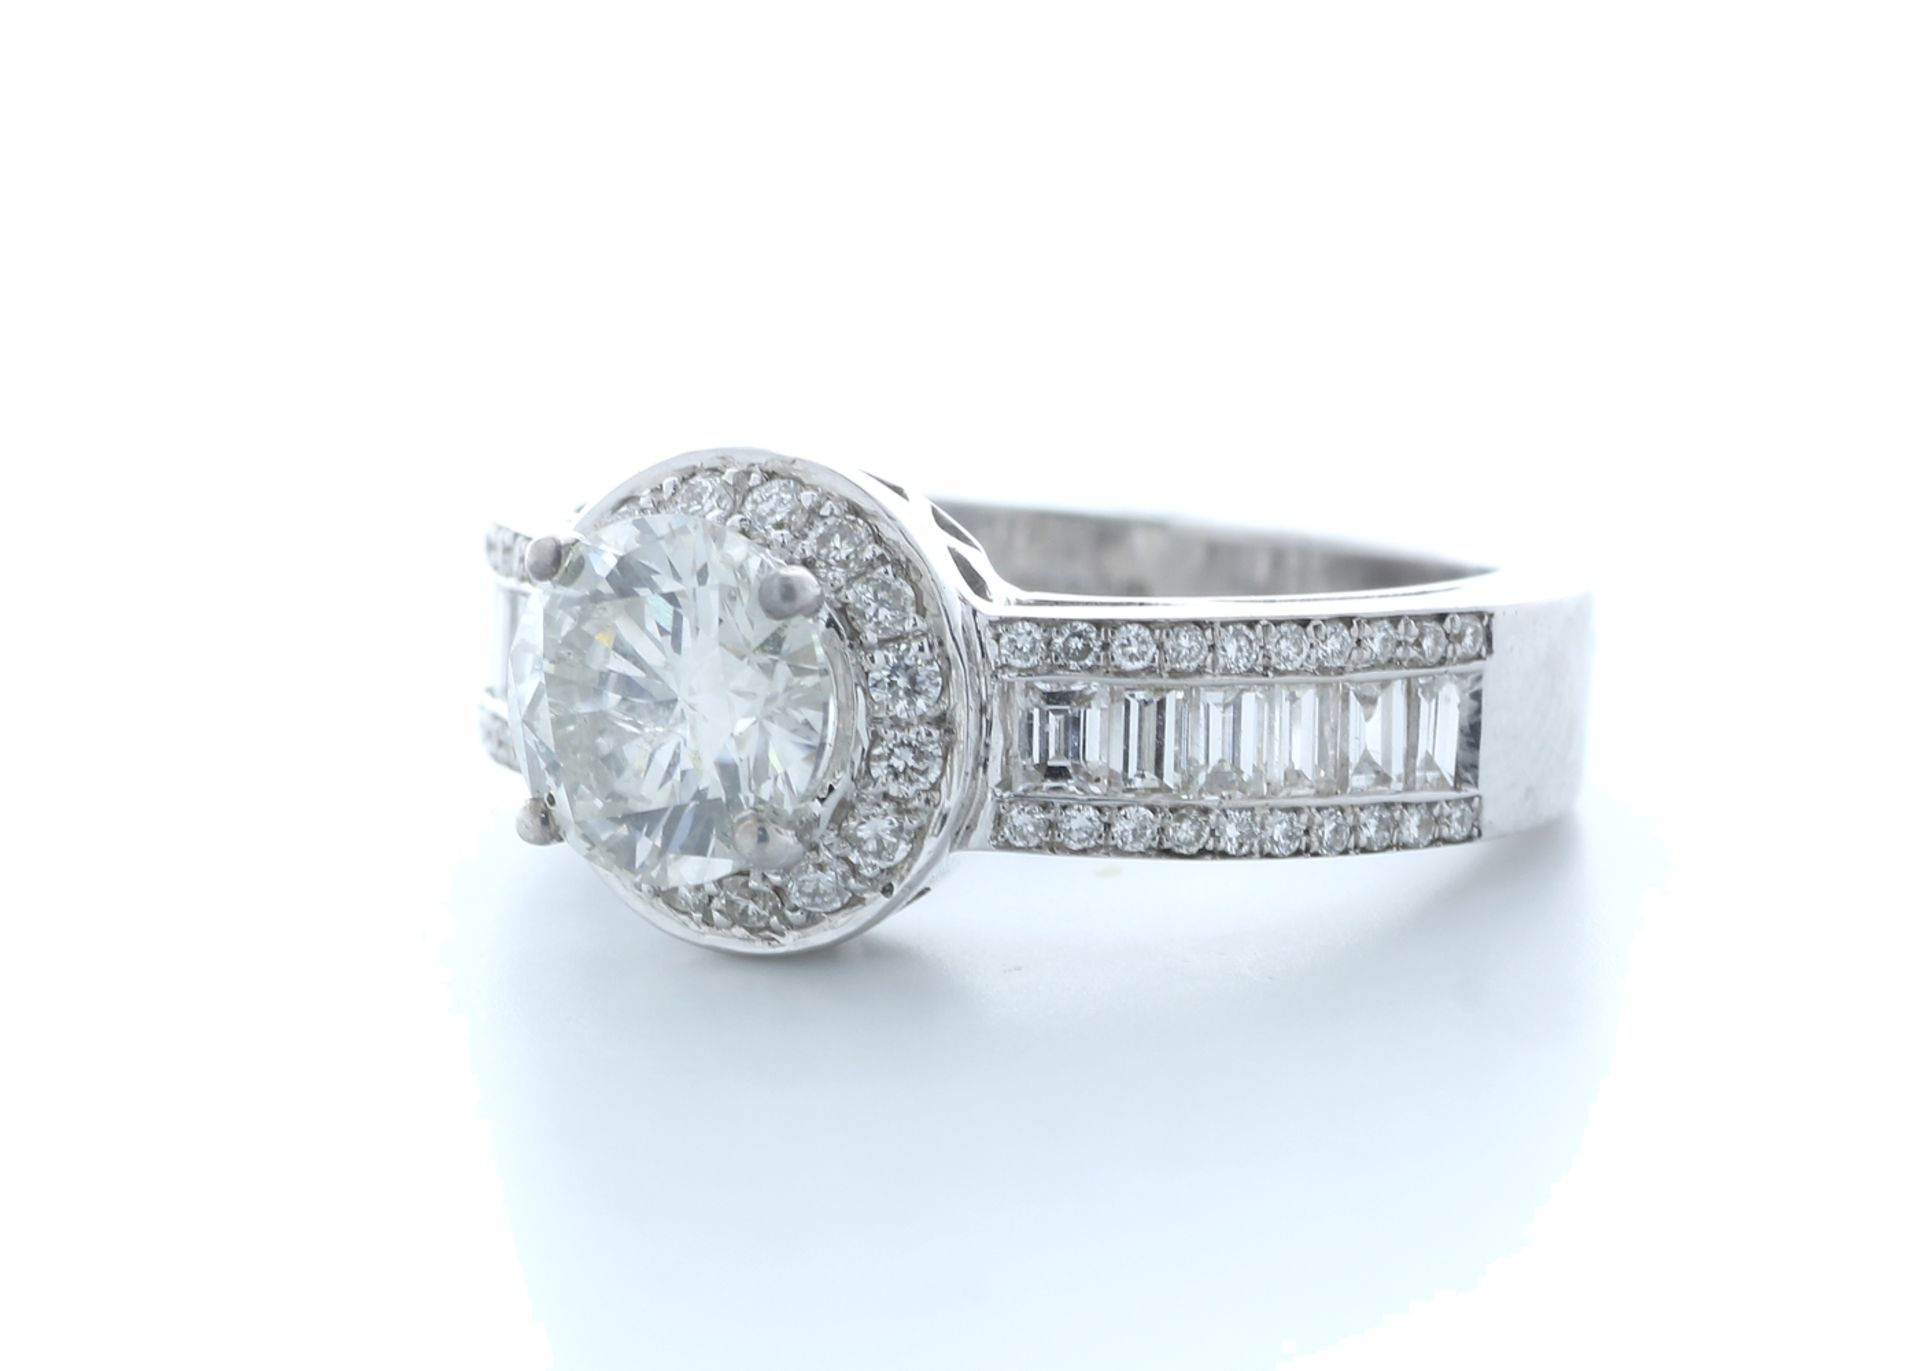 18ct White Gold Single Stone With Halo Setting Ring 2.62 (1.22) Carats - Valued by IDI £26,000. - Image 2 of 5